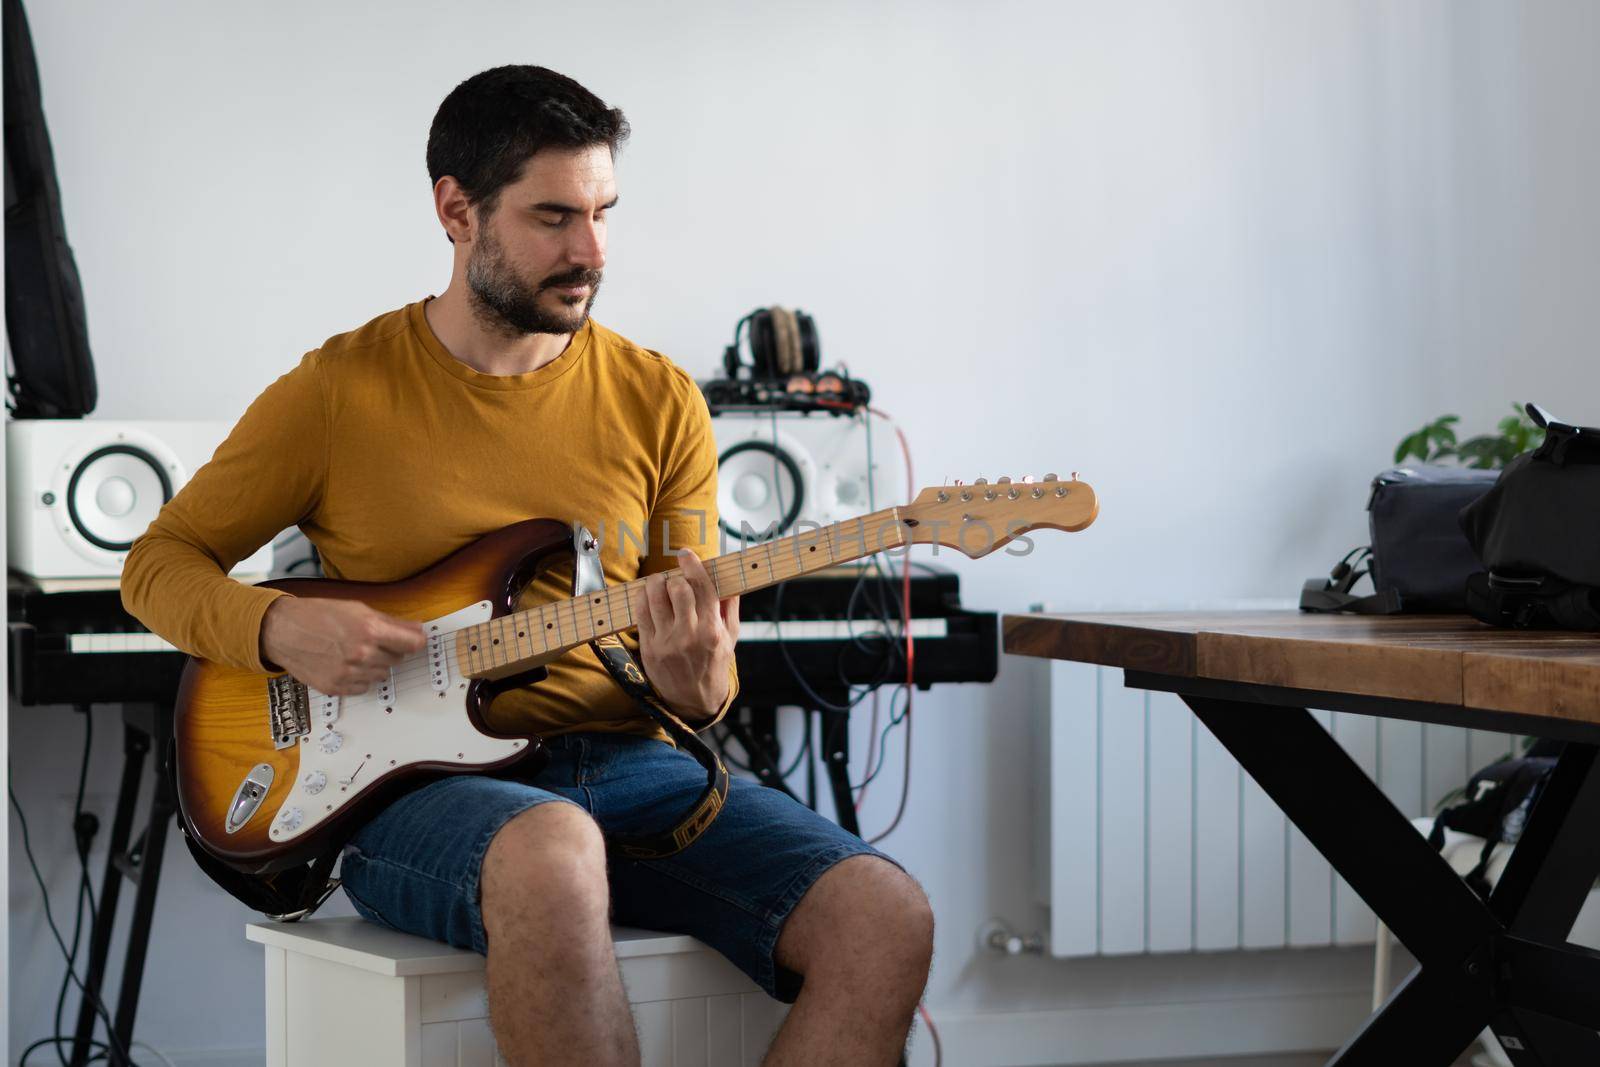 young boy with beard playing guitar at home with piano on the back